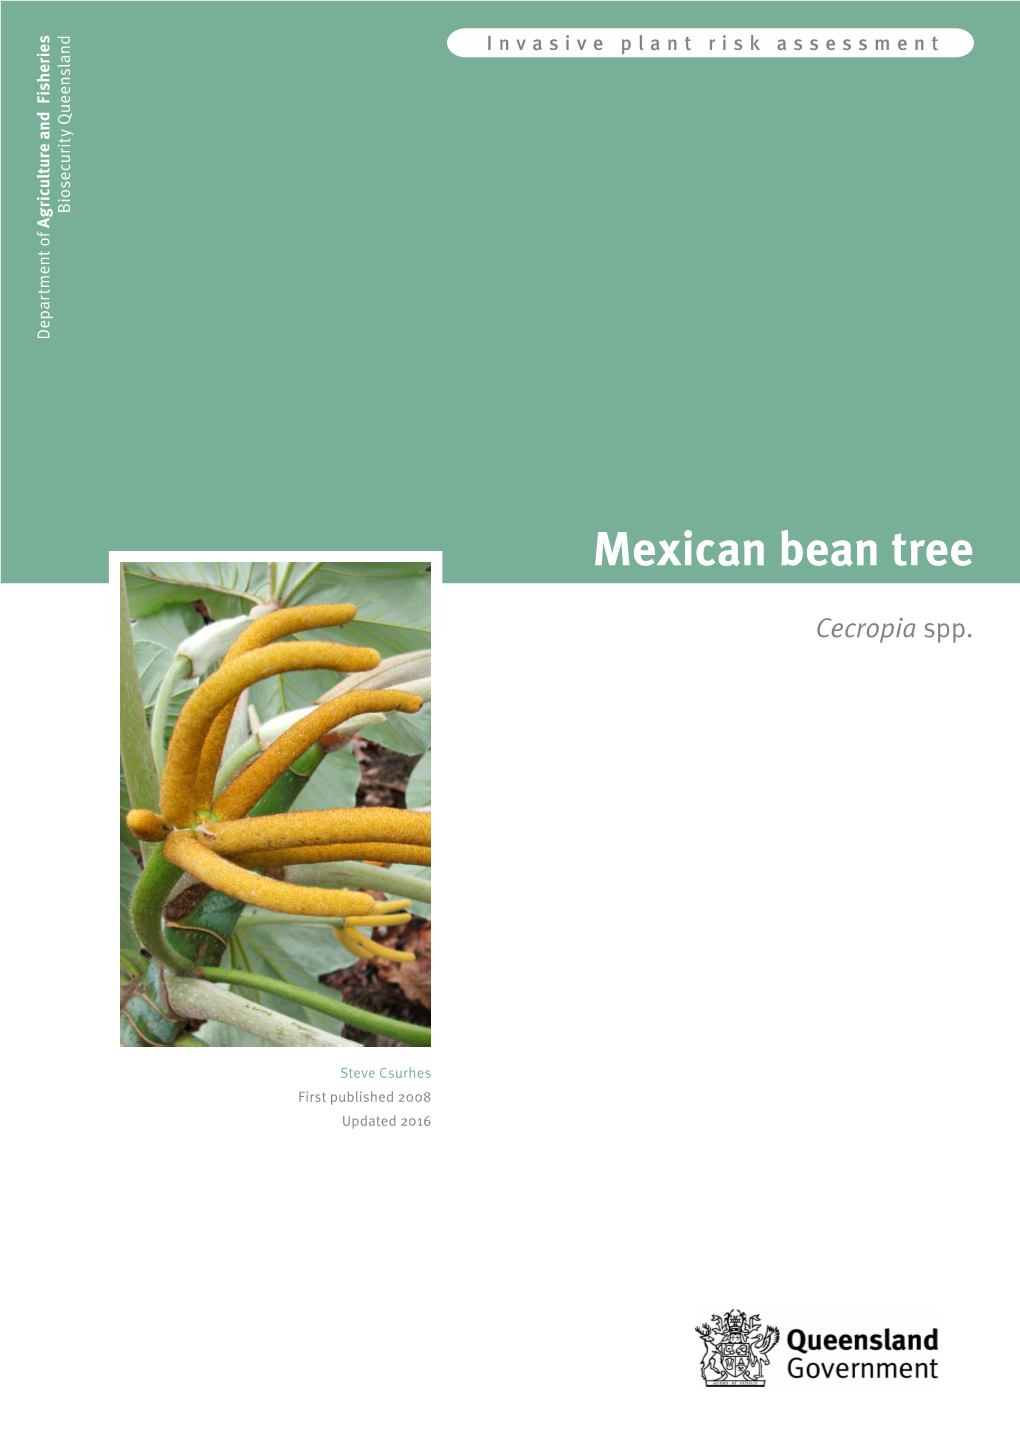 Mexican Bean Tree Risk Assessment